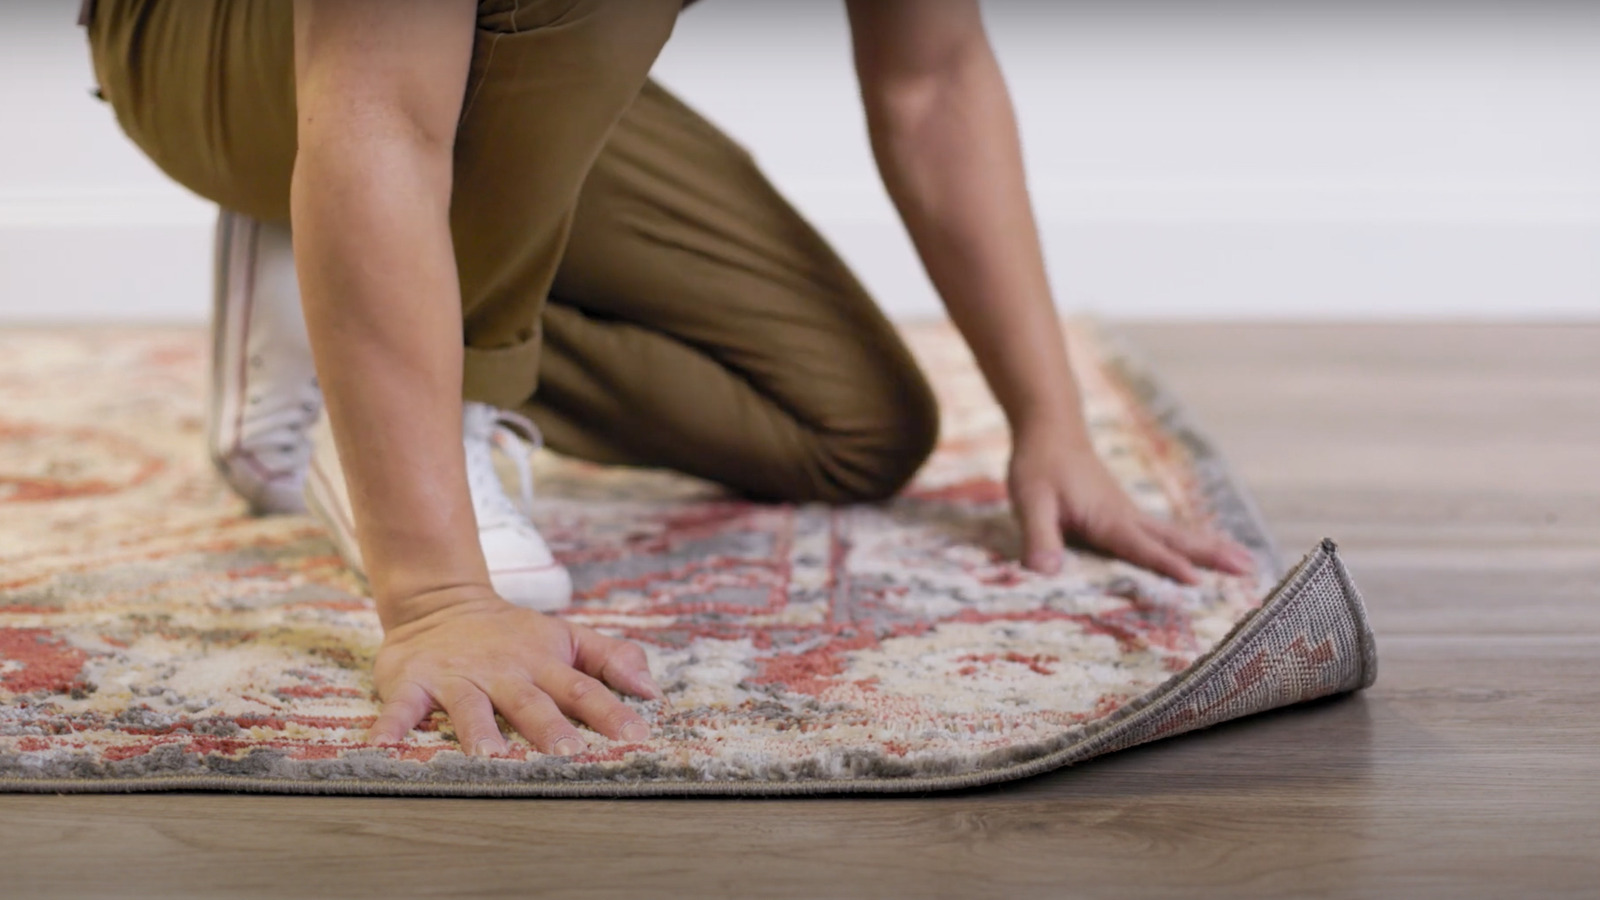 https://www.housedigest.com/img/gallery/this-tiktok-hack-flattens-a-curled-rug-corner-by-using-ice-cubes/l-intro-1685732323.jpg